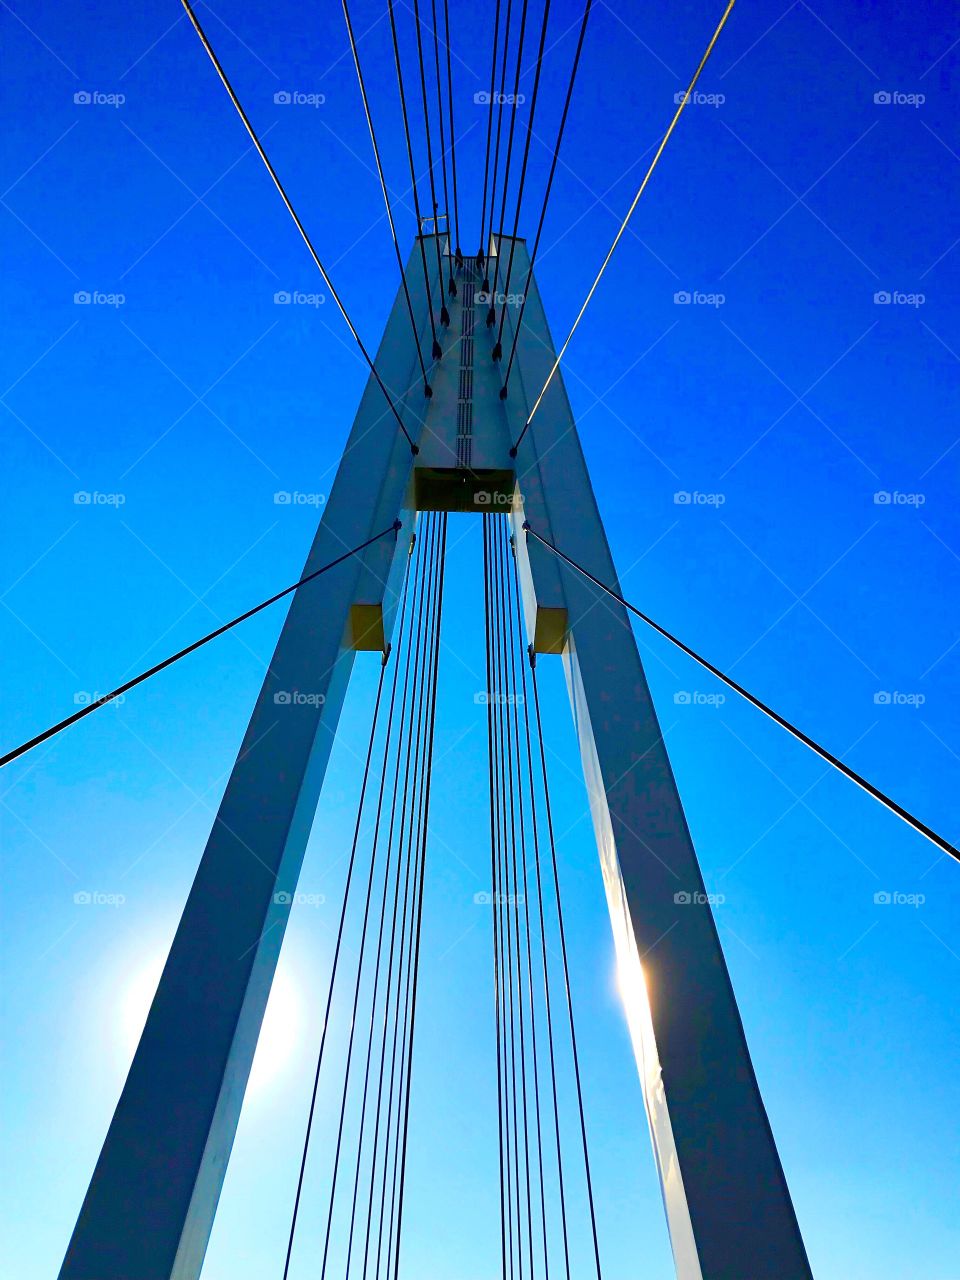 metal construction on blue sky background